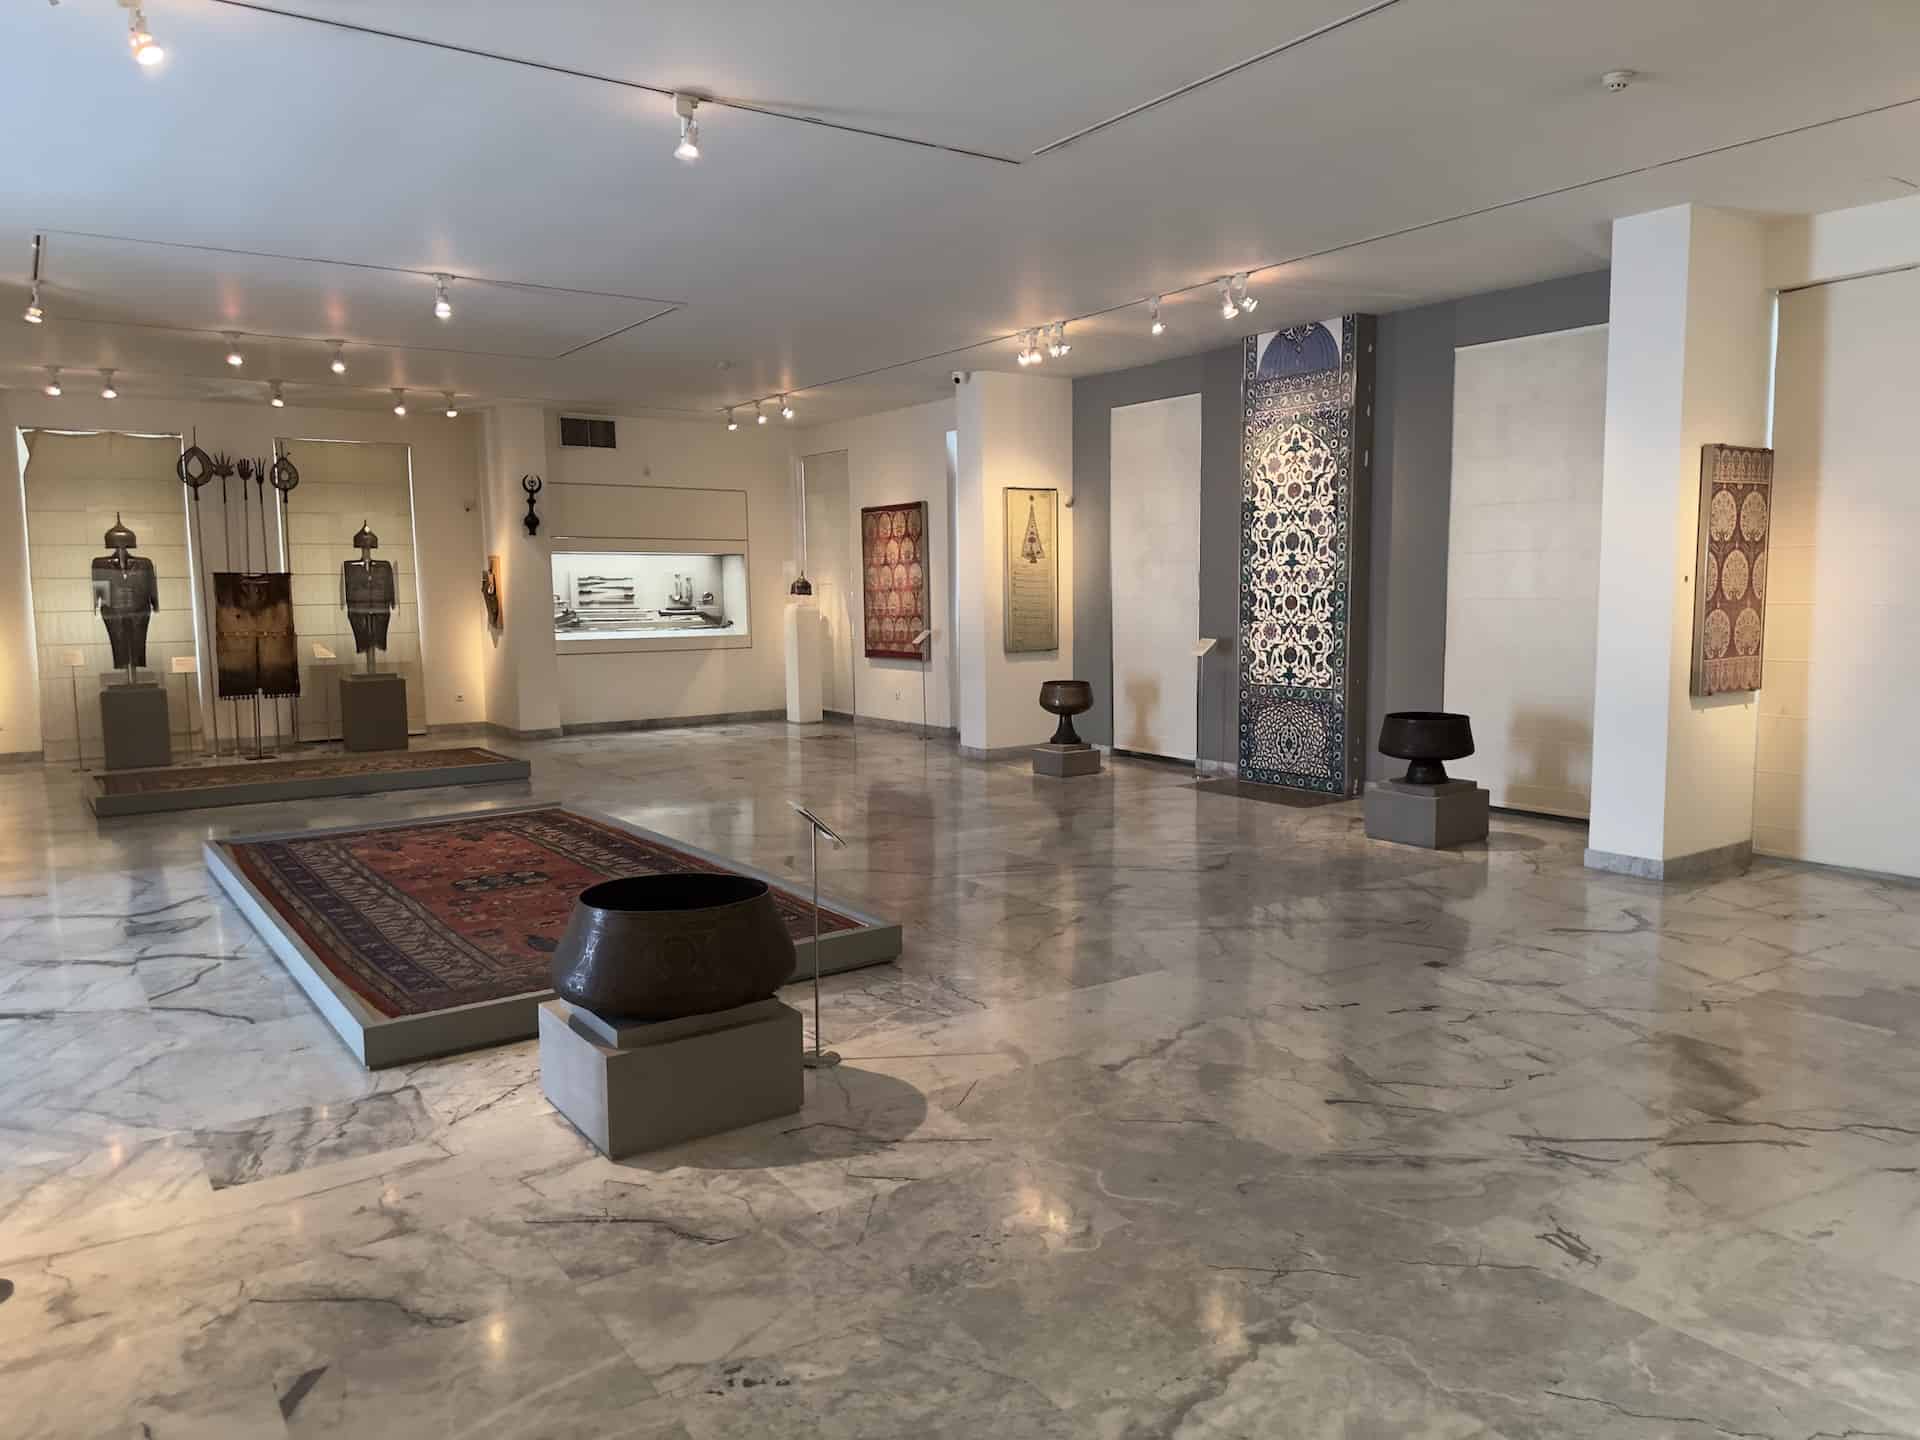 Gallery IV at the Benaki Museum of Islamic Art in Athens, Greece